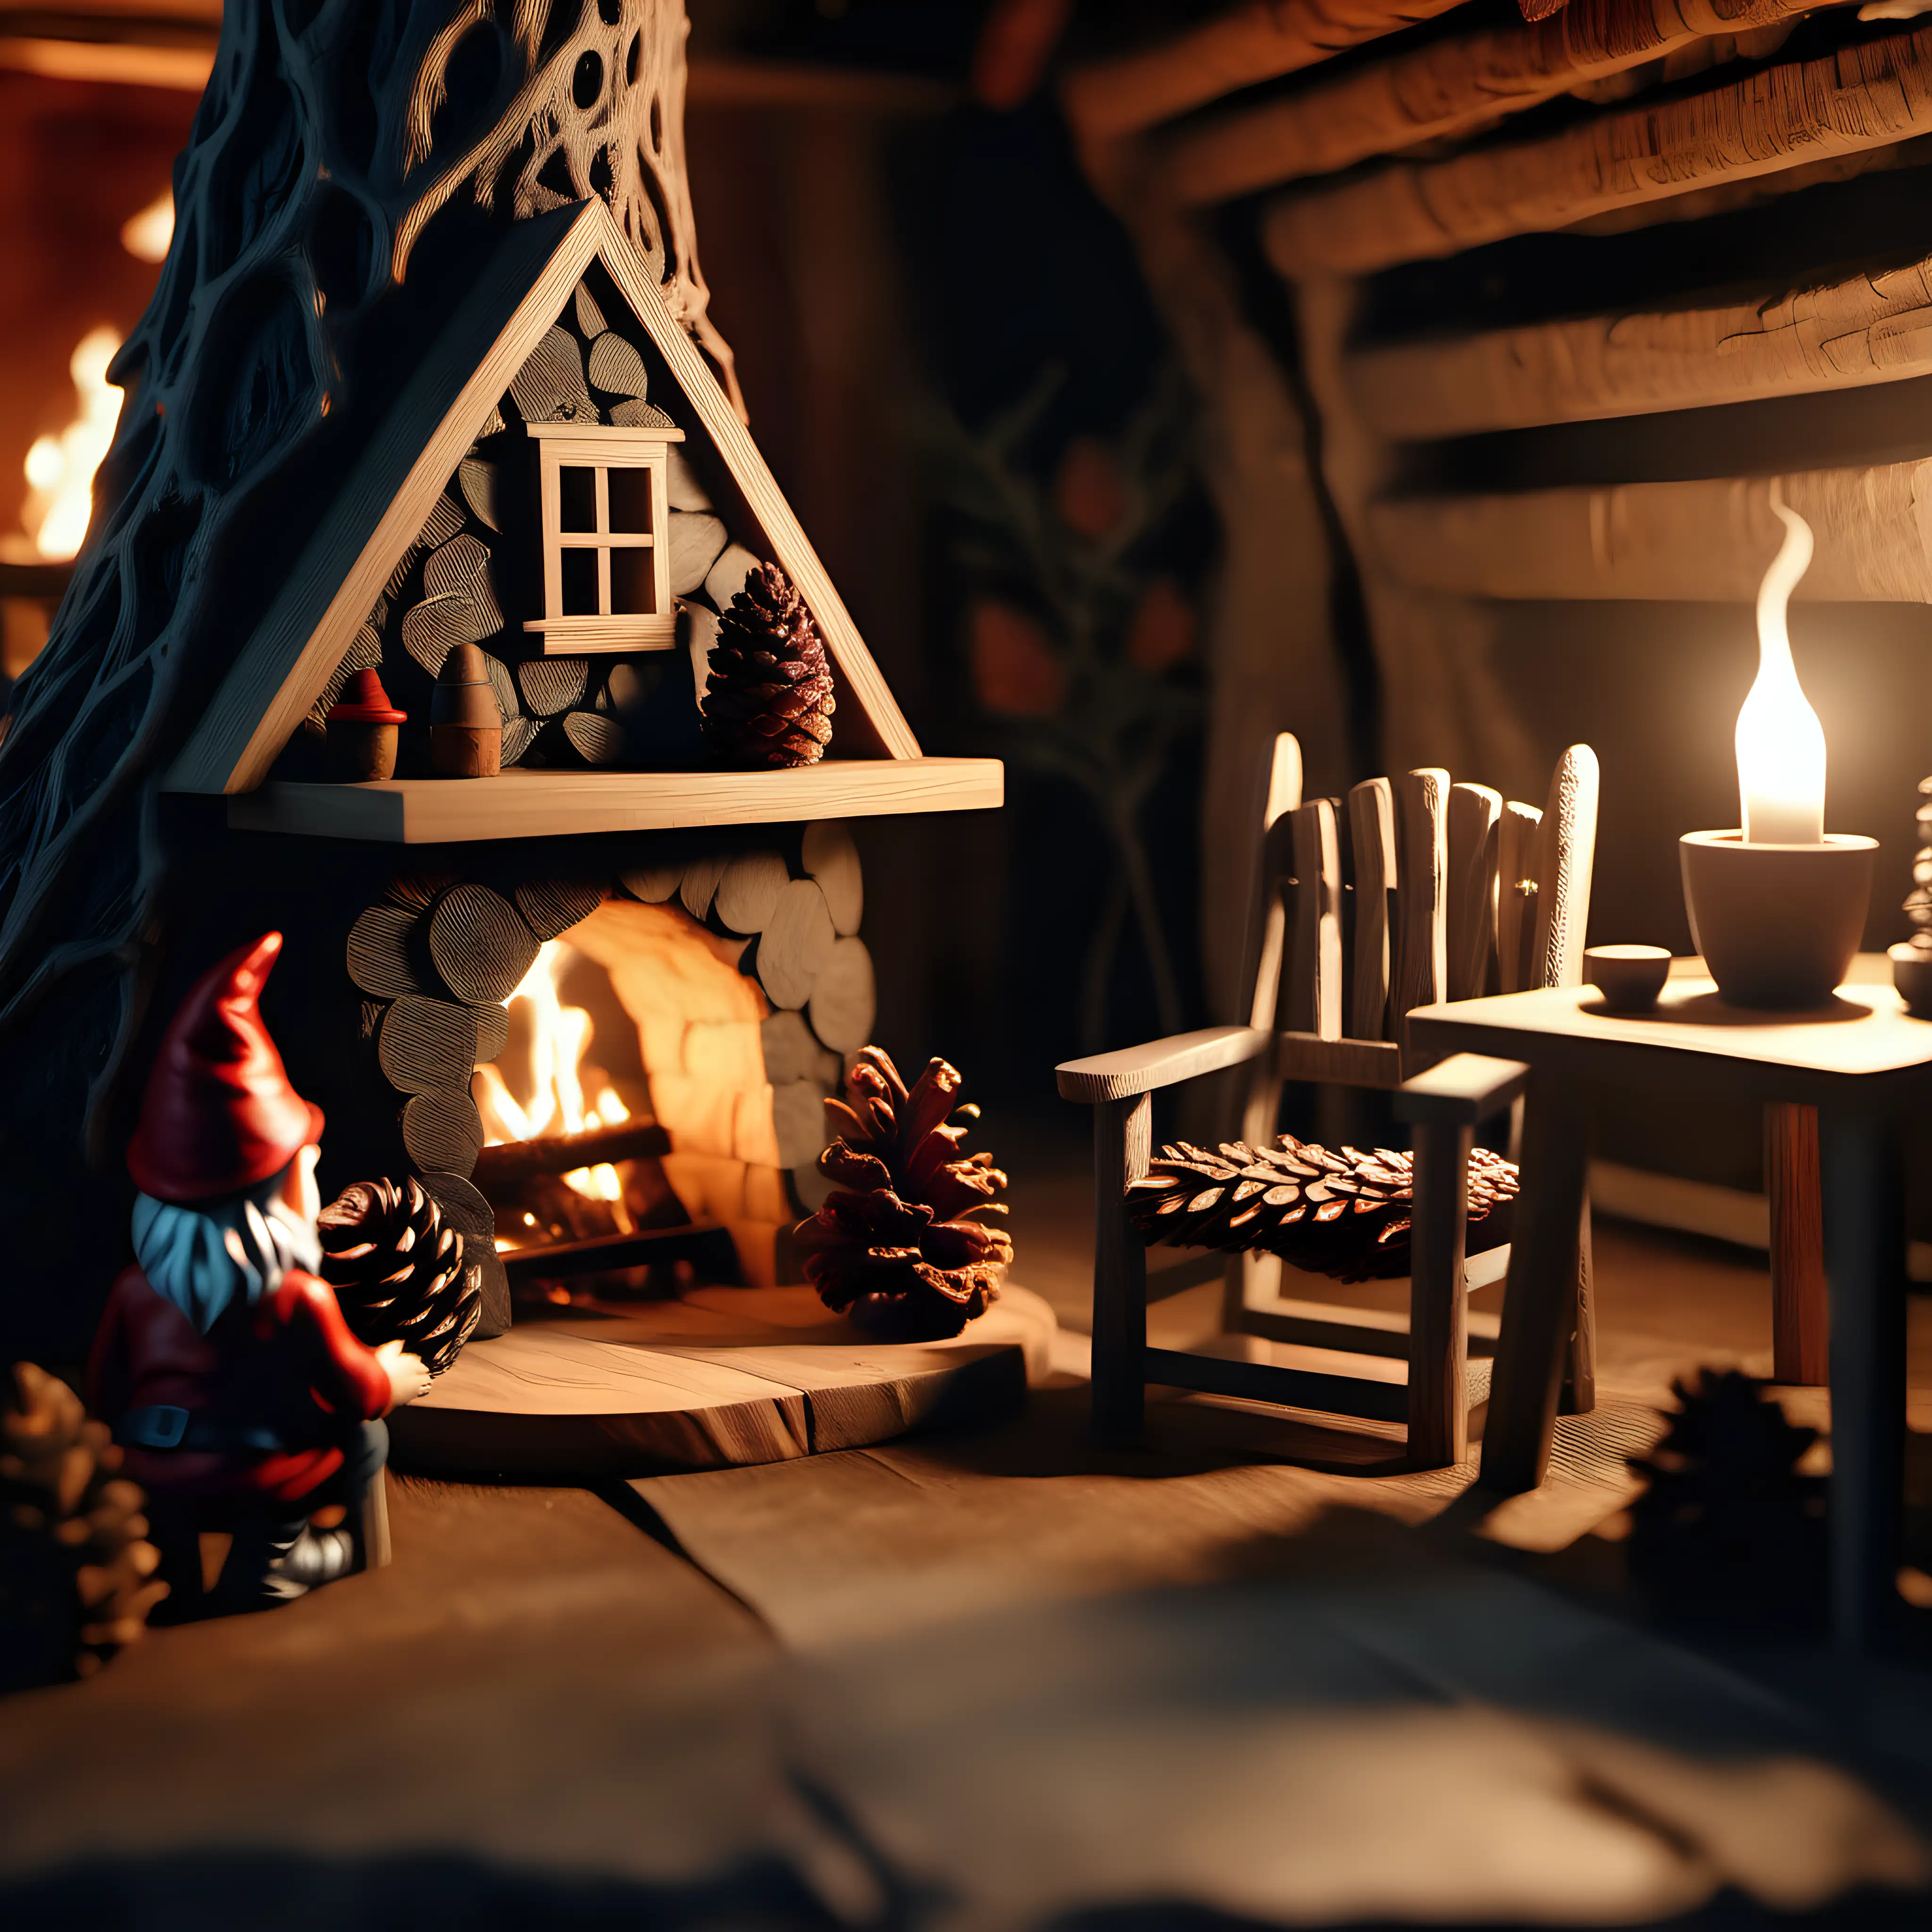 inside a gnome home. inside tree, fireplace, pinecone as chair, miniature furniture, warm atmosphere, 1080f resolution, ultra 4K, high definition, volumetric light